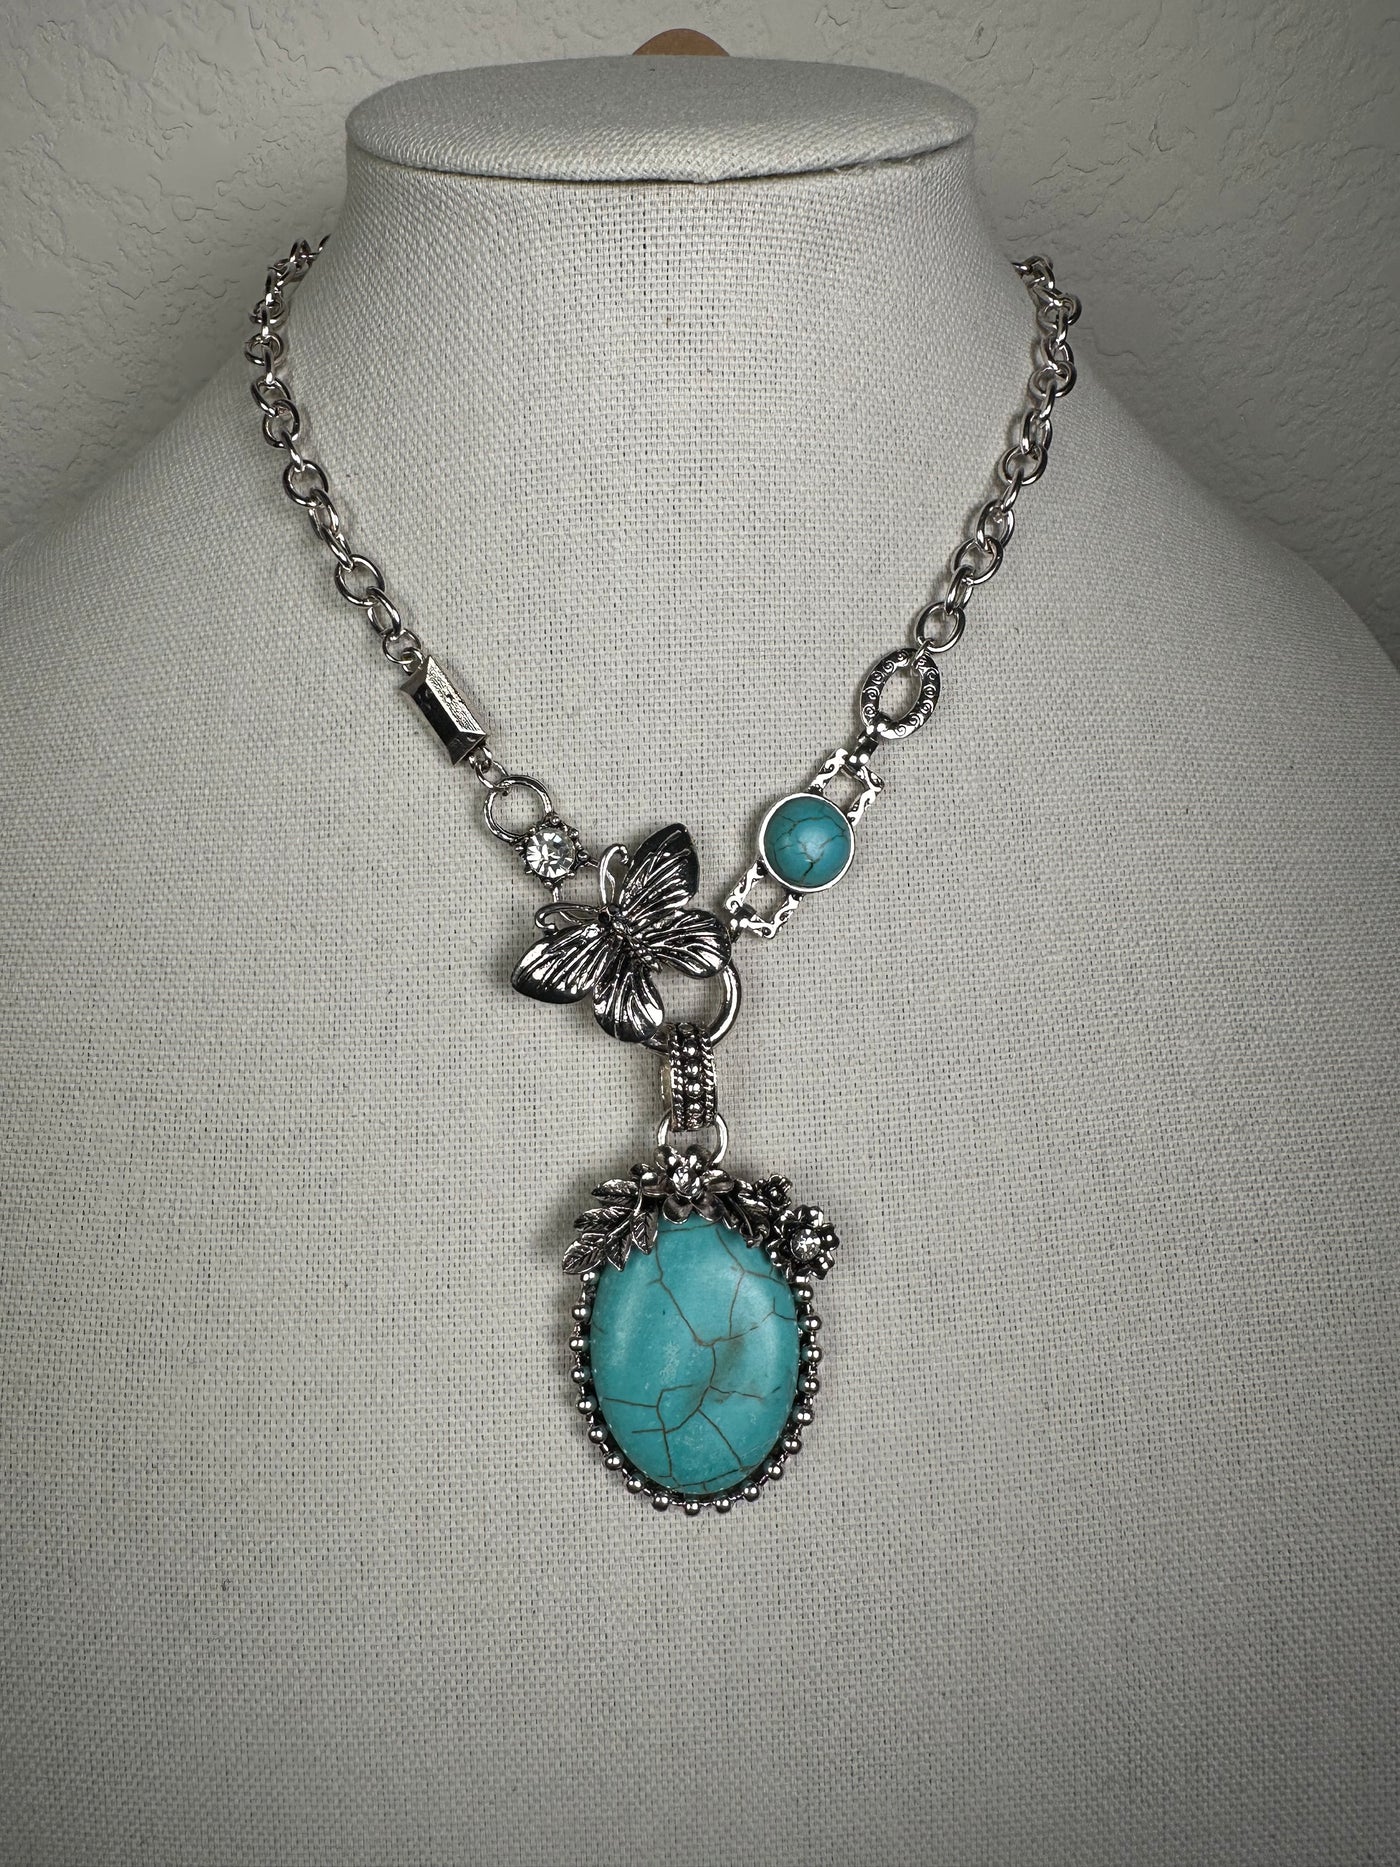 Silver Tone Necklace with an Ornate Oval Blue Turquoise Howlite Drop